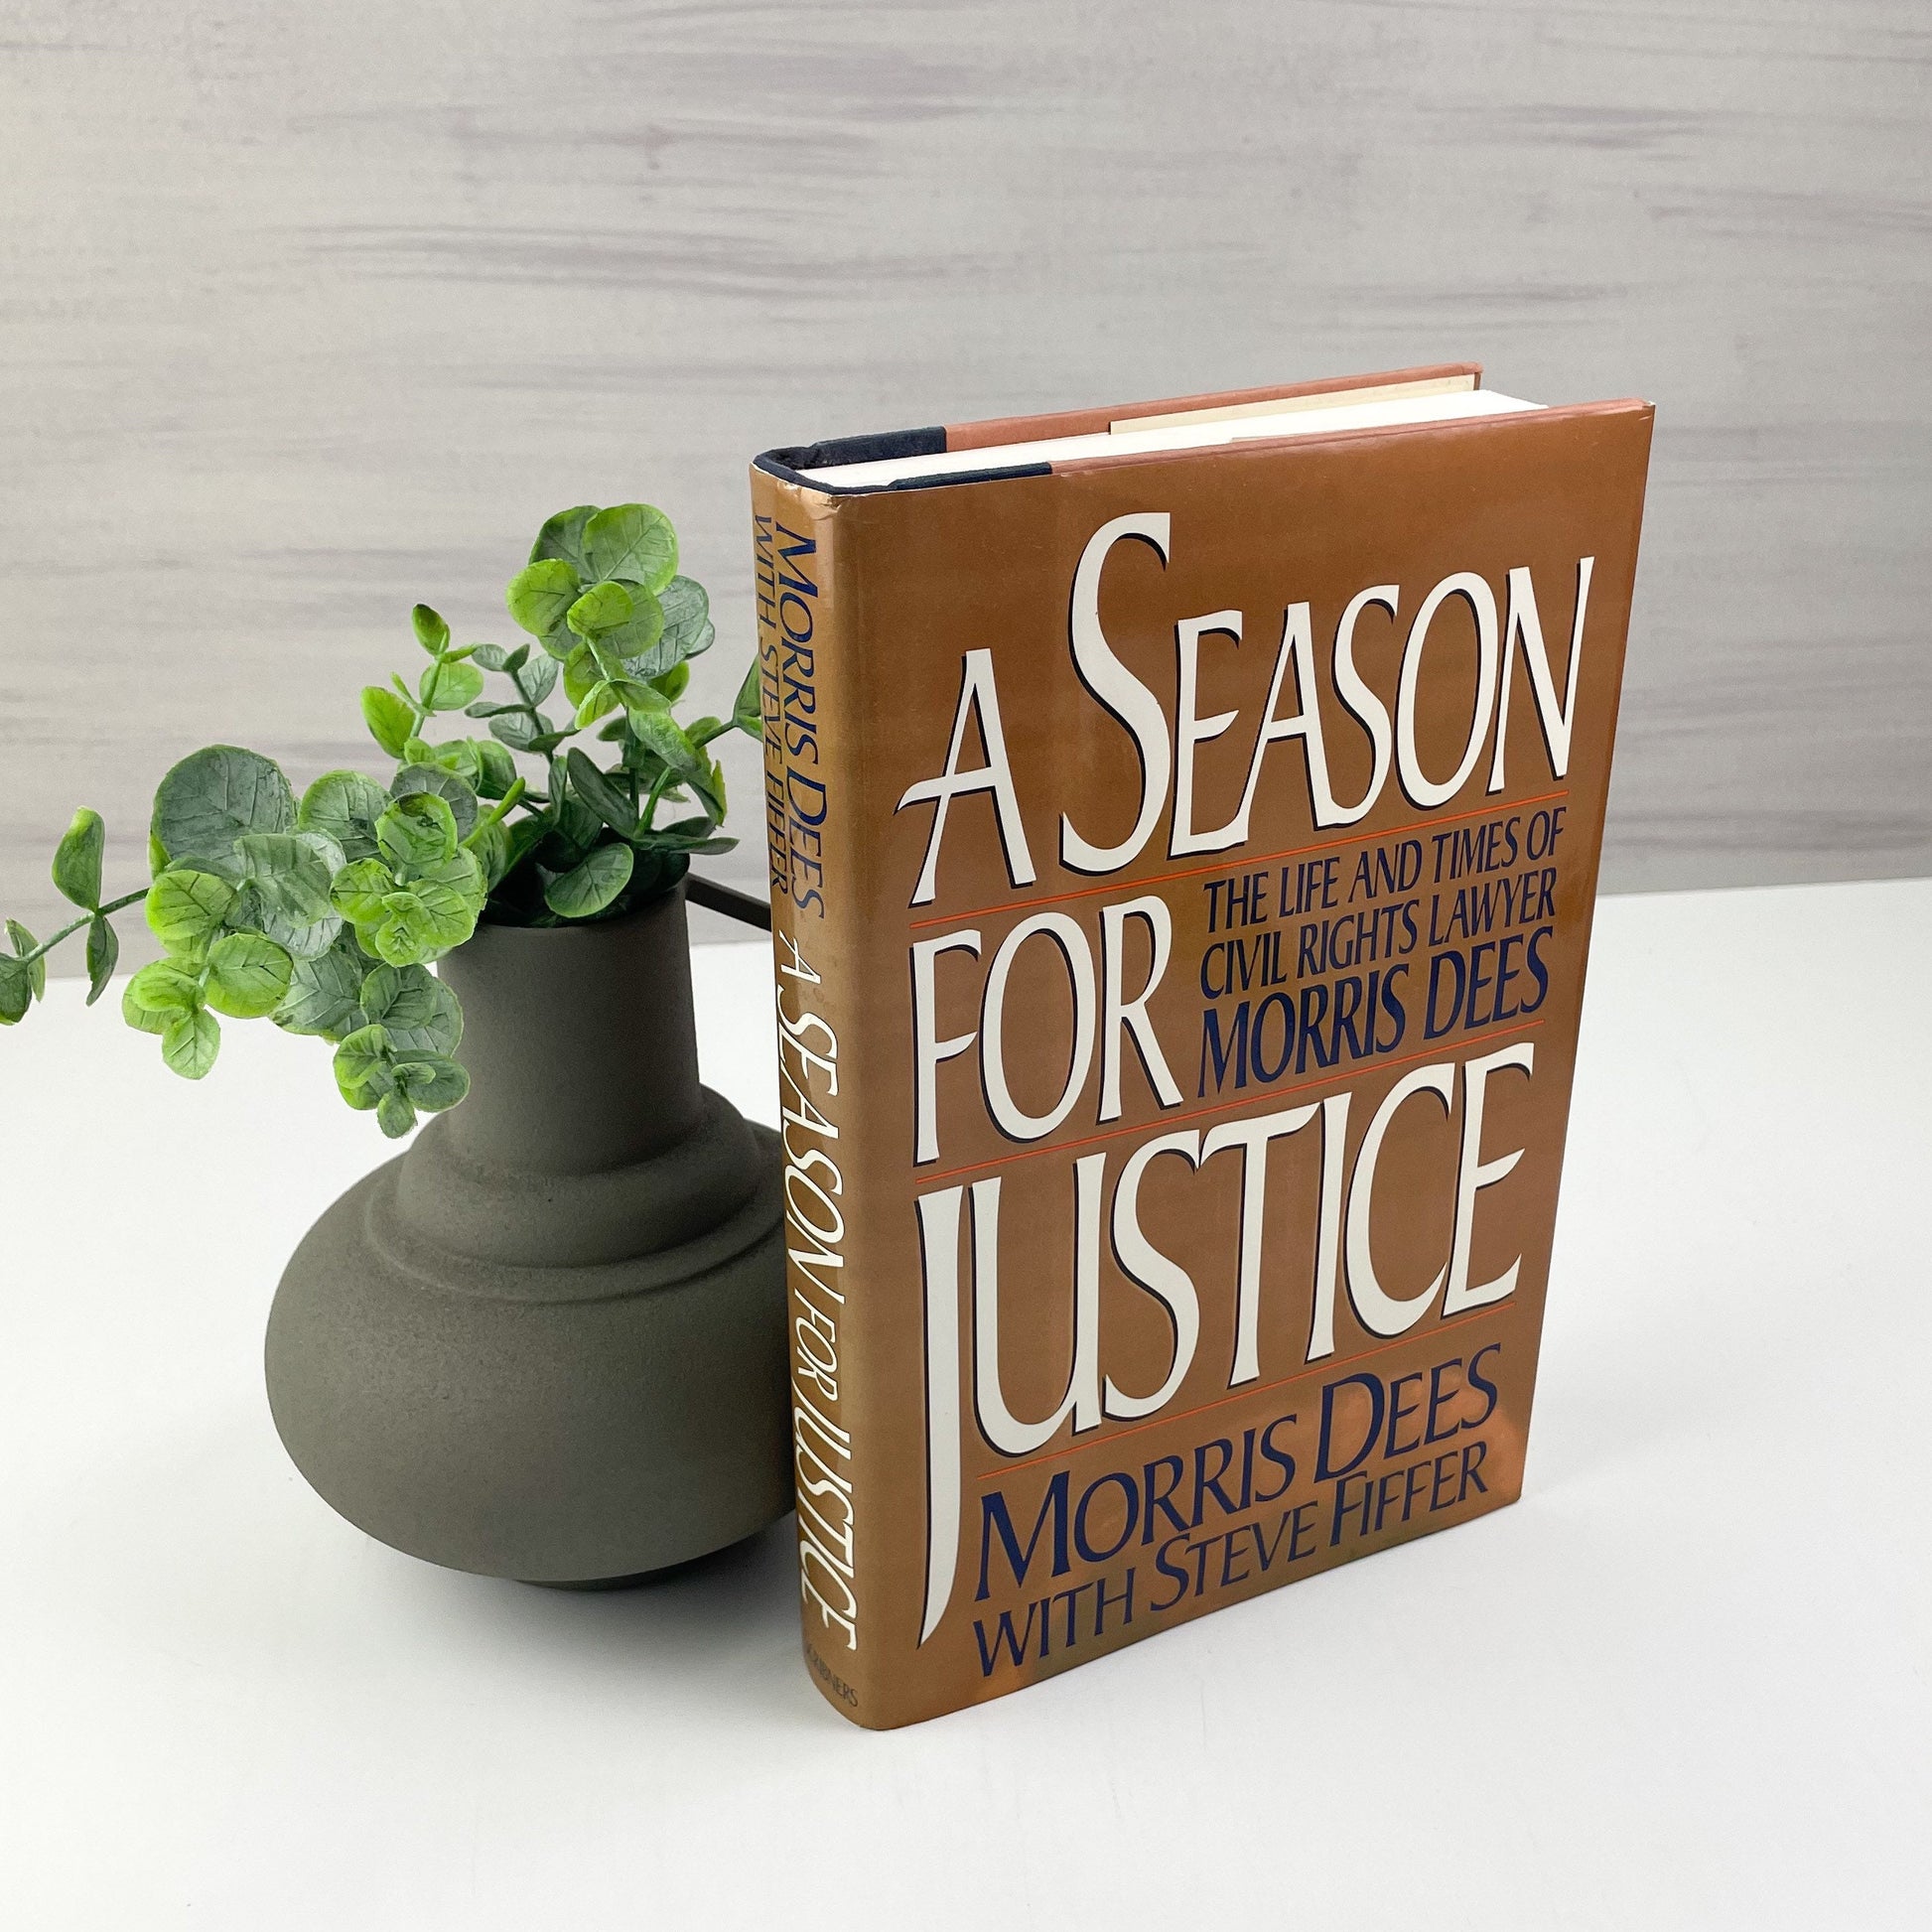 Signed with Personal Letter, A Season for Justice by Morris Dees with Steve Fiffer